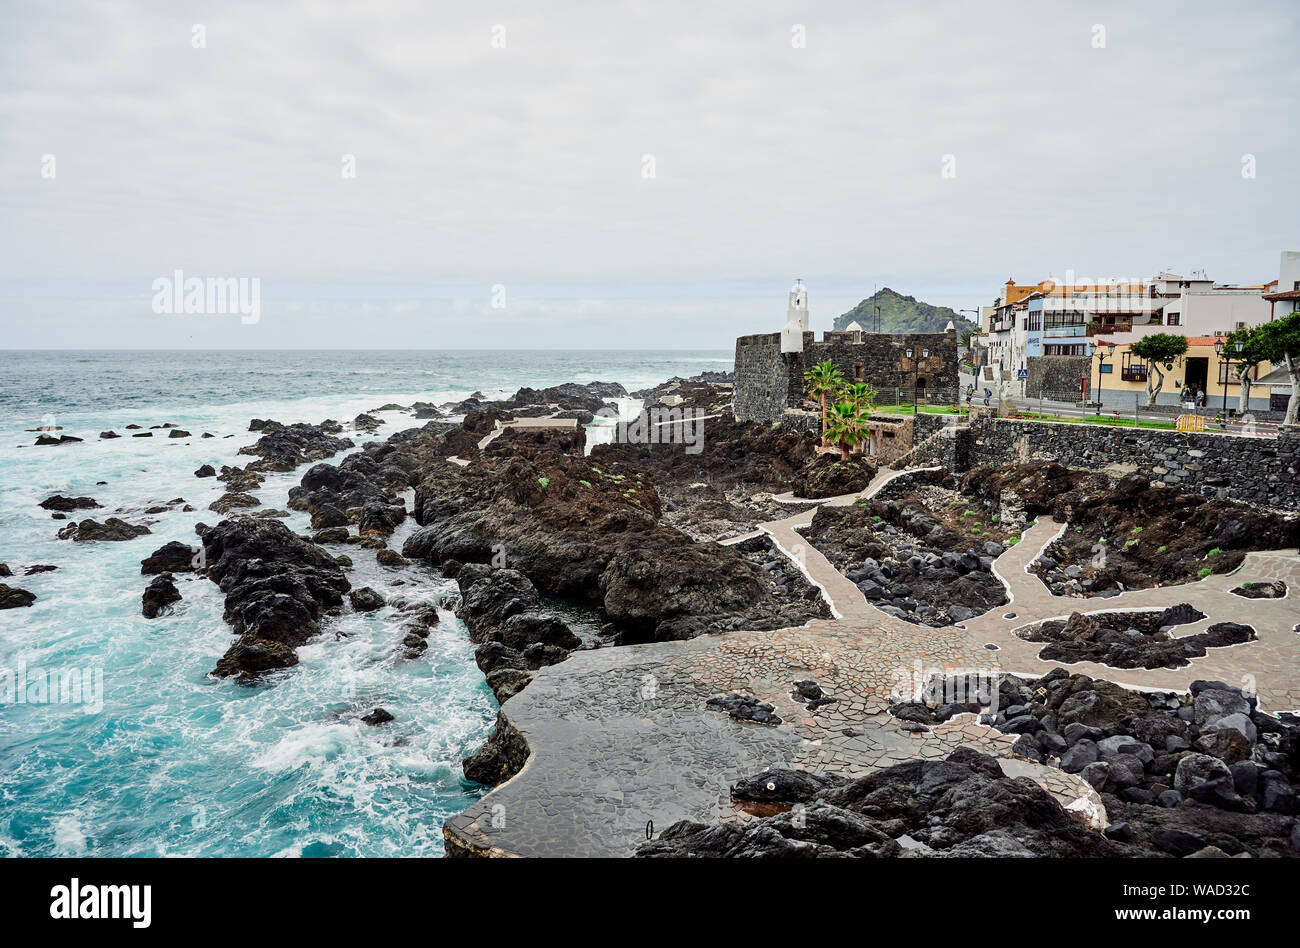 Majestic view of rocky shore with paved paths and black stones between small town and turquoise wavy ocean on nasty day, Tenerife, Spain Stock Photo